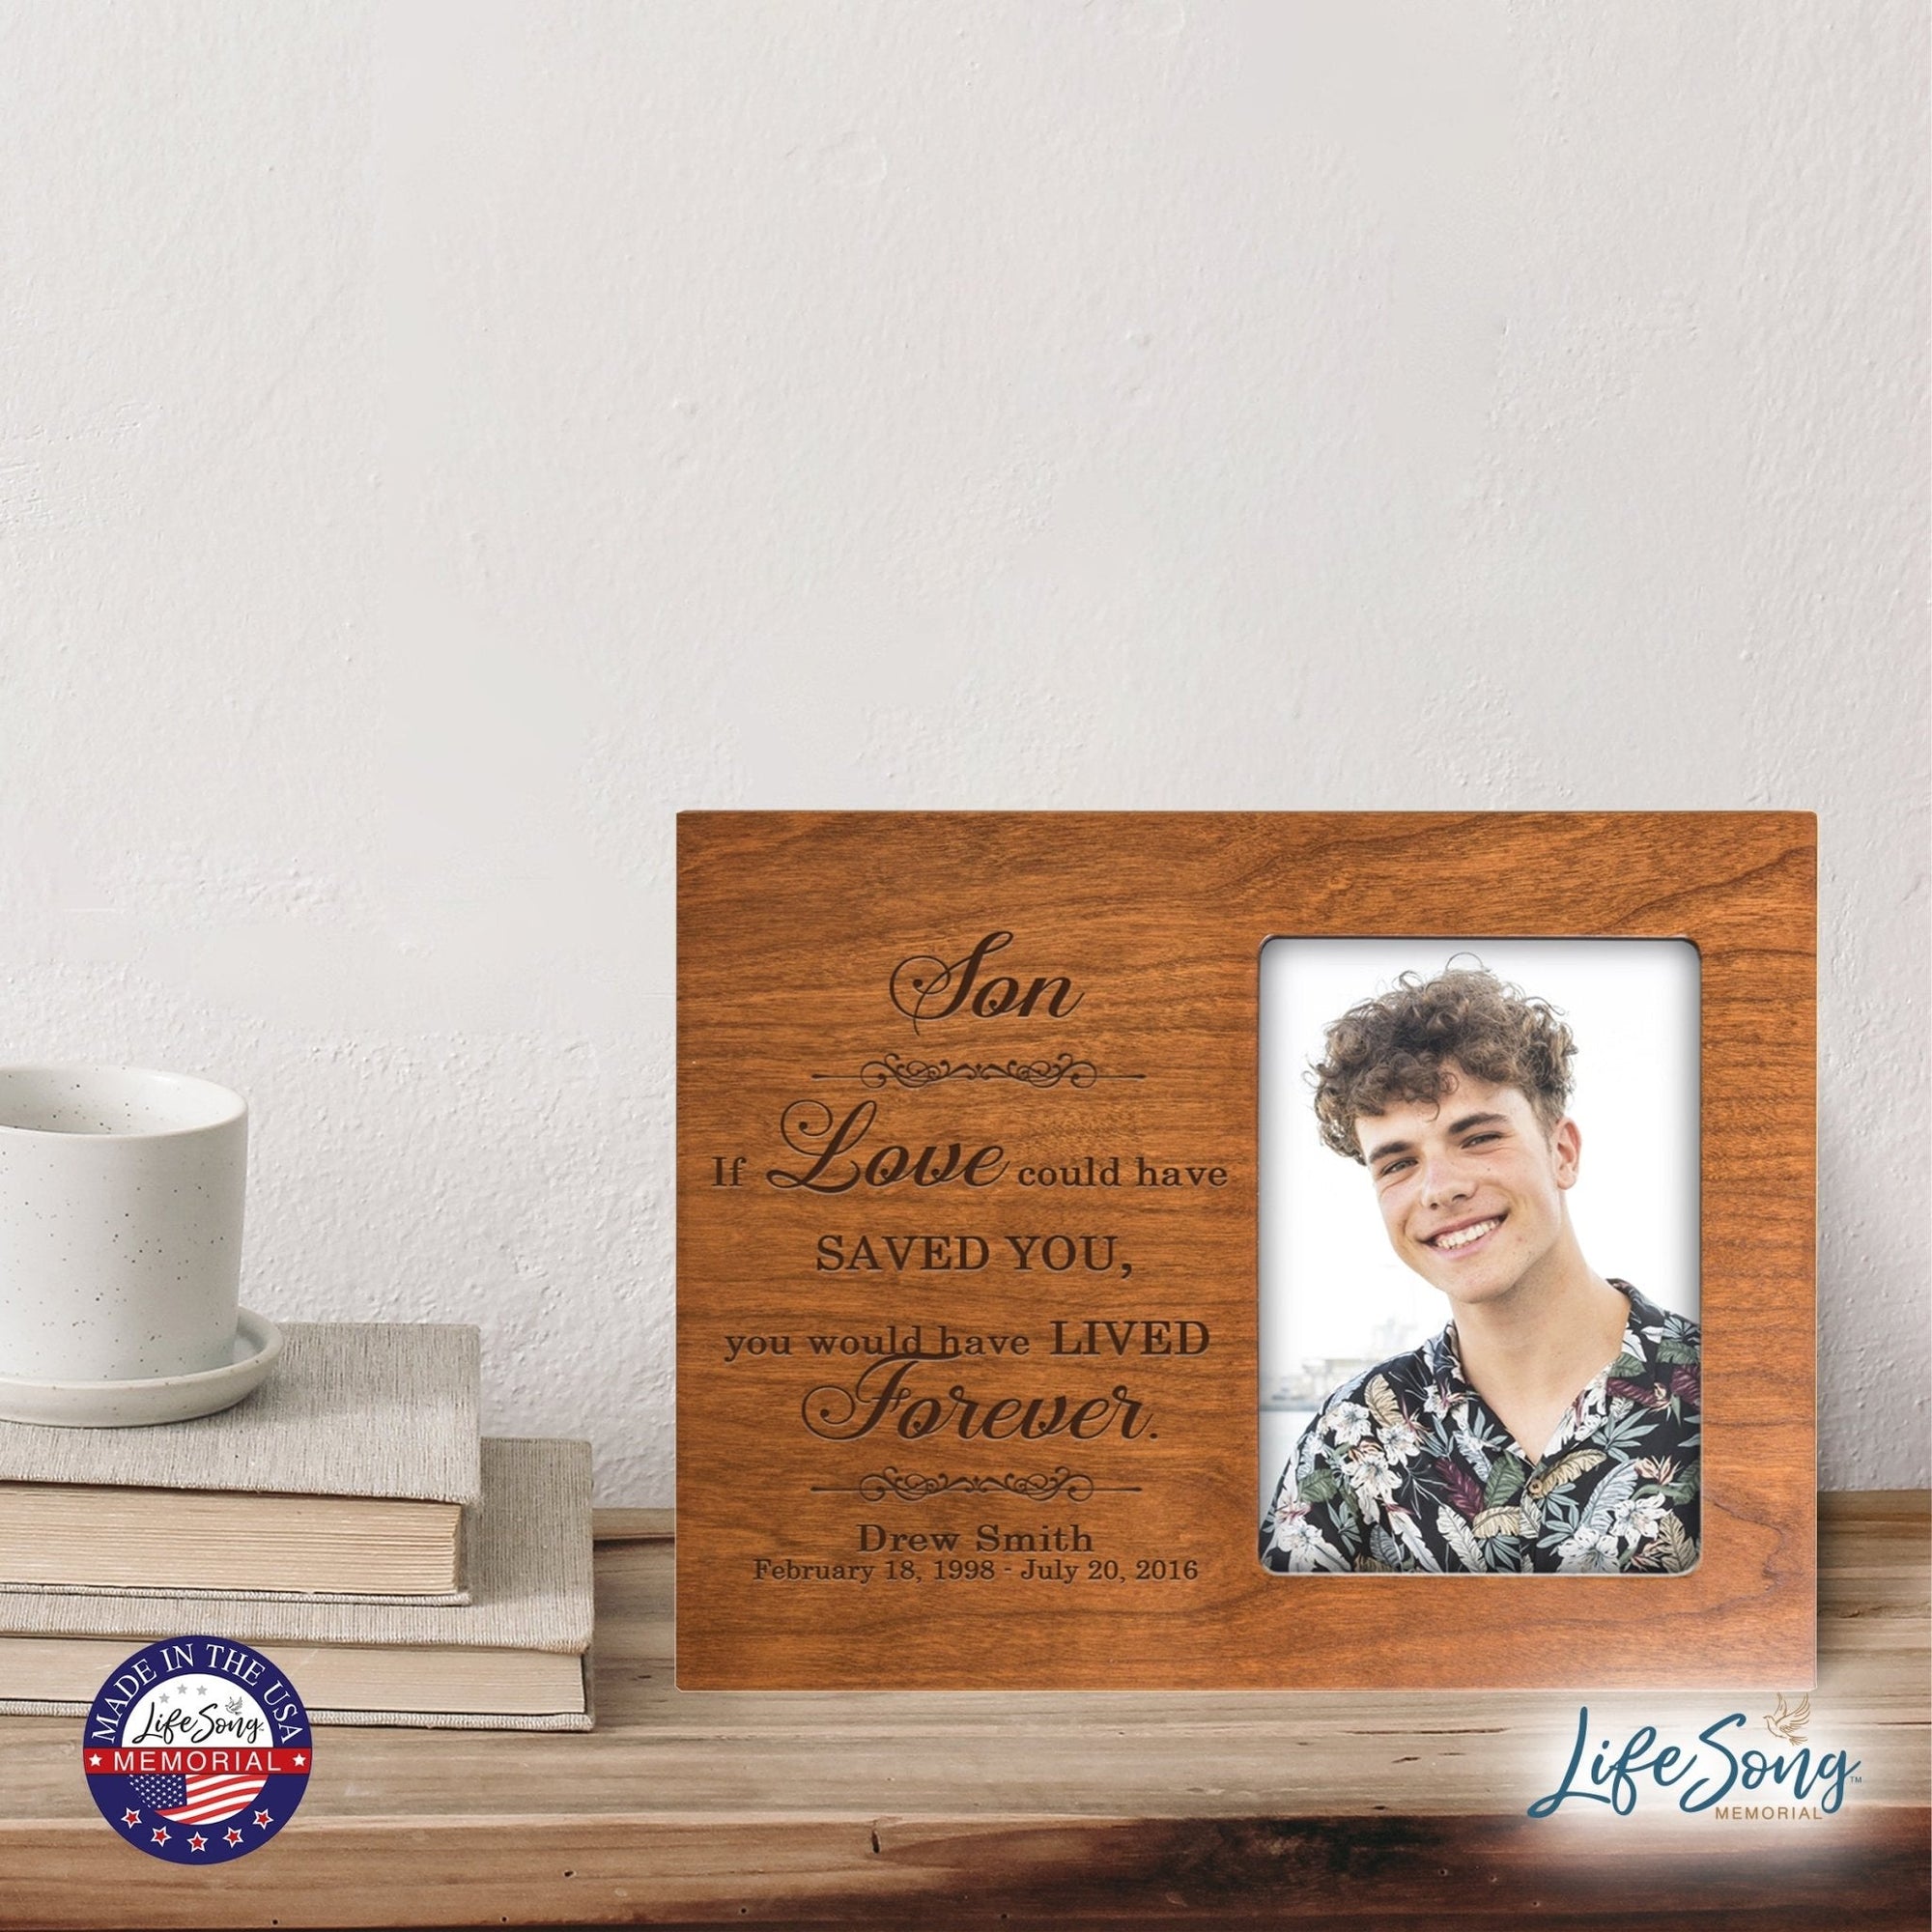 Personalized Horizontal 8x10 Wooden Memorial Picture Frame Holds 4x6 Photo - Son, If Love Could - LifeSong Milestones